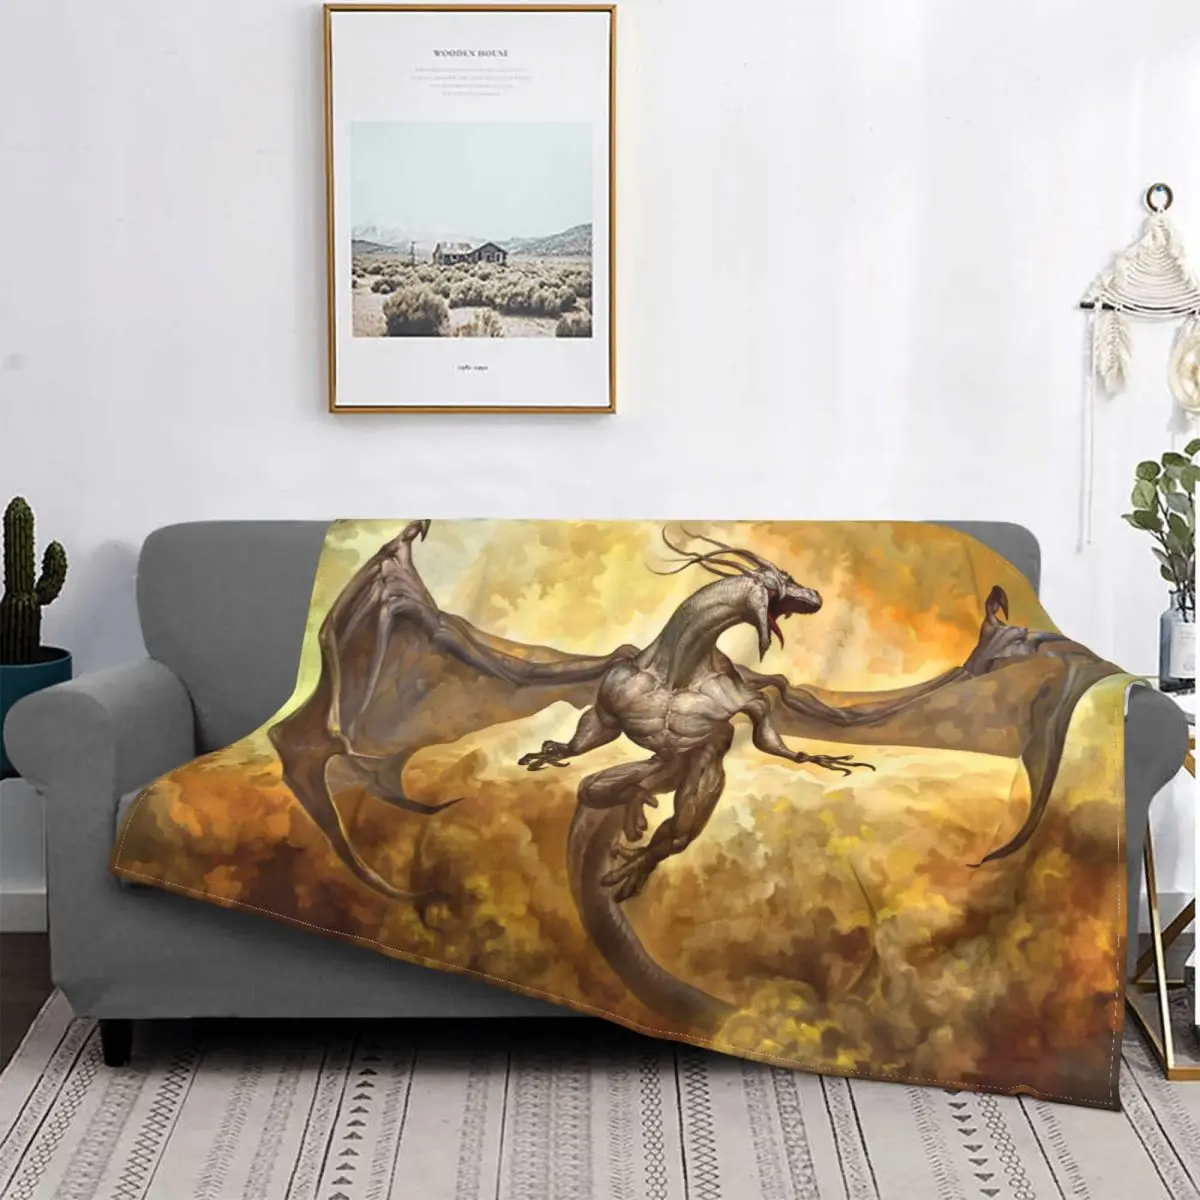 

Dragon Blanket Coral Fleece Plush Autumn/Winter Flying Dragon Animal Portable Lightweight Throw Blanket for Bed Couch Quilt